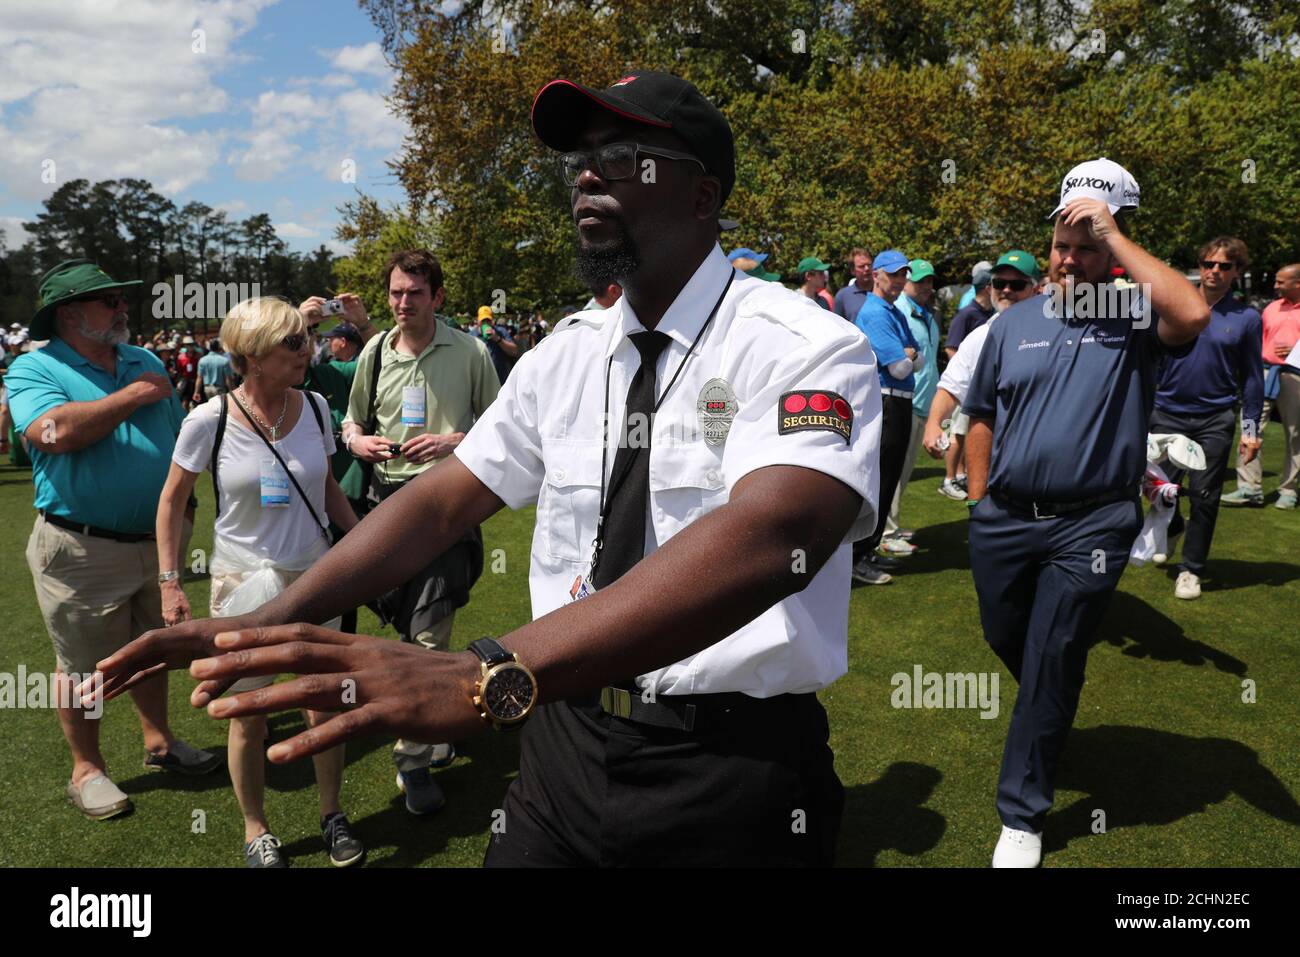 Shane Lowry of Ireland is guided through the crowd by security during the  second day of practice for the 2019 Masters golf tournament at the Augusta  National Golf Club in Augusta, Georgia,